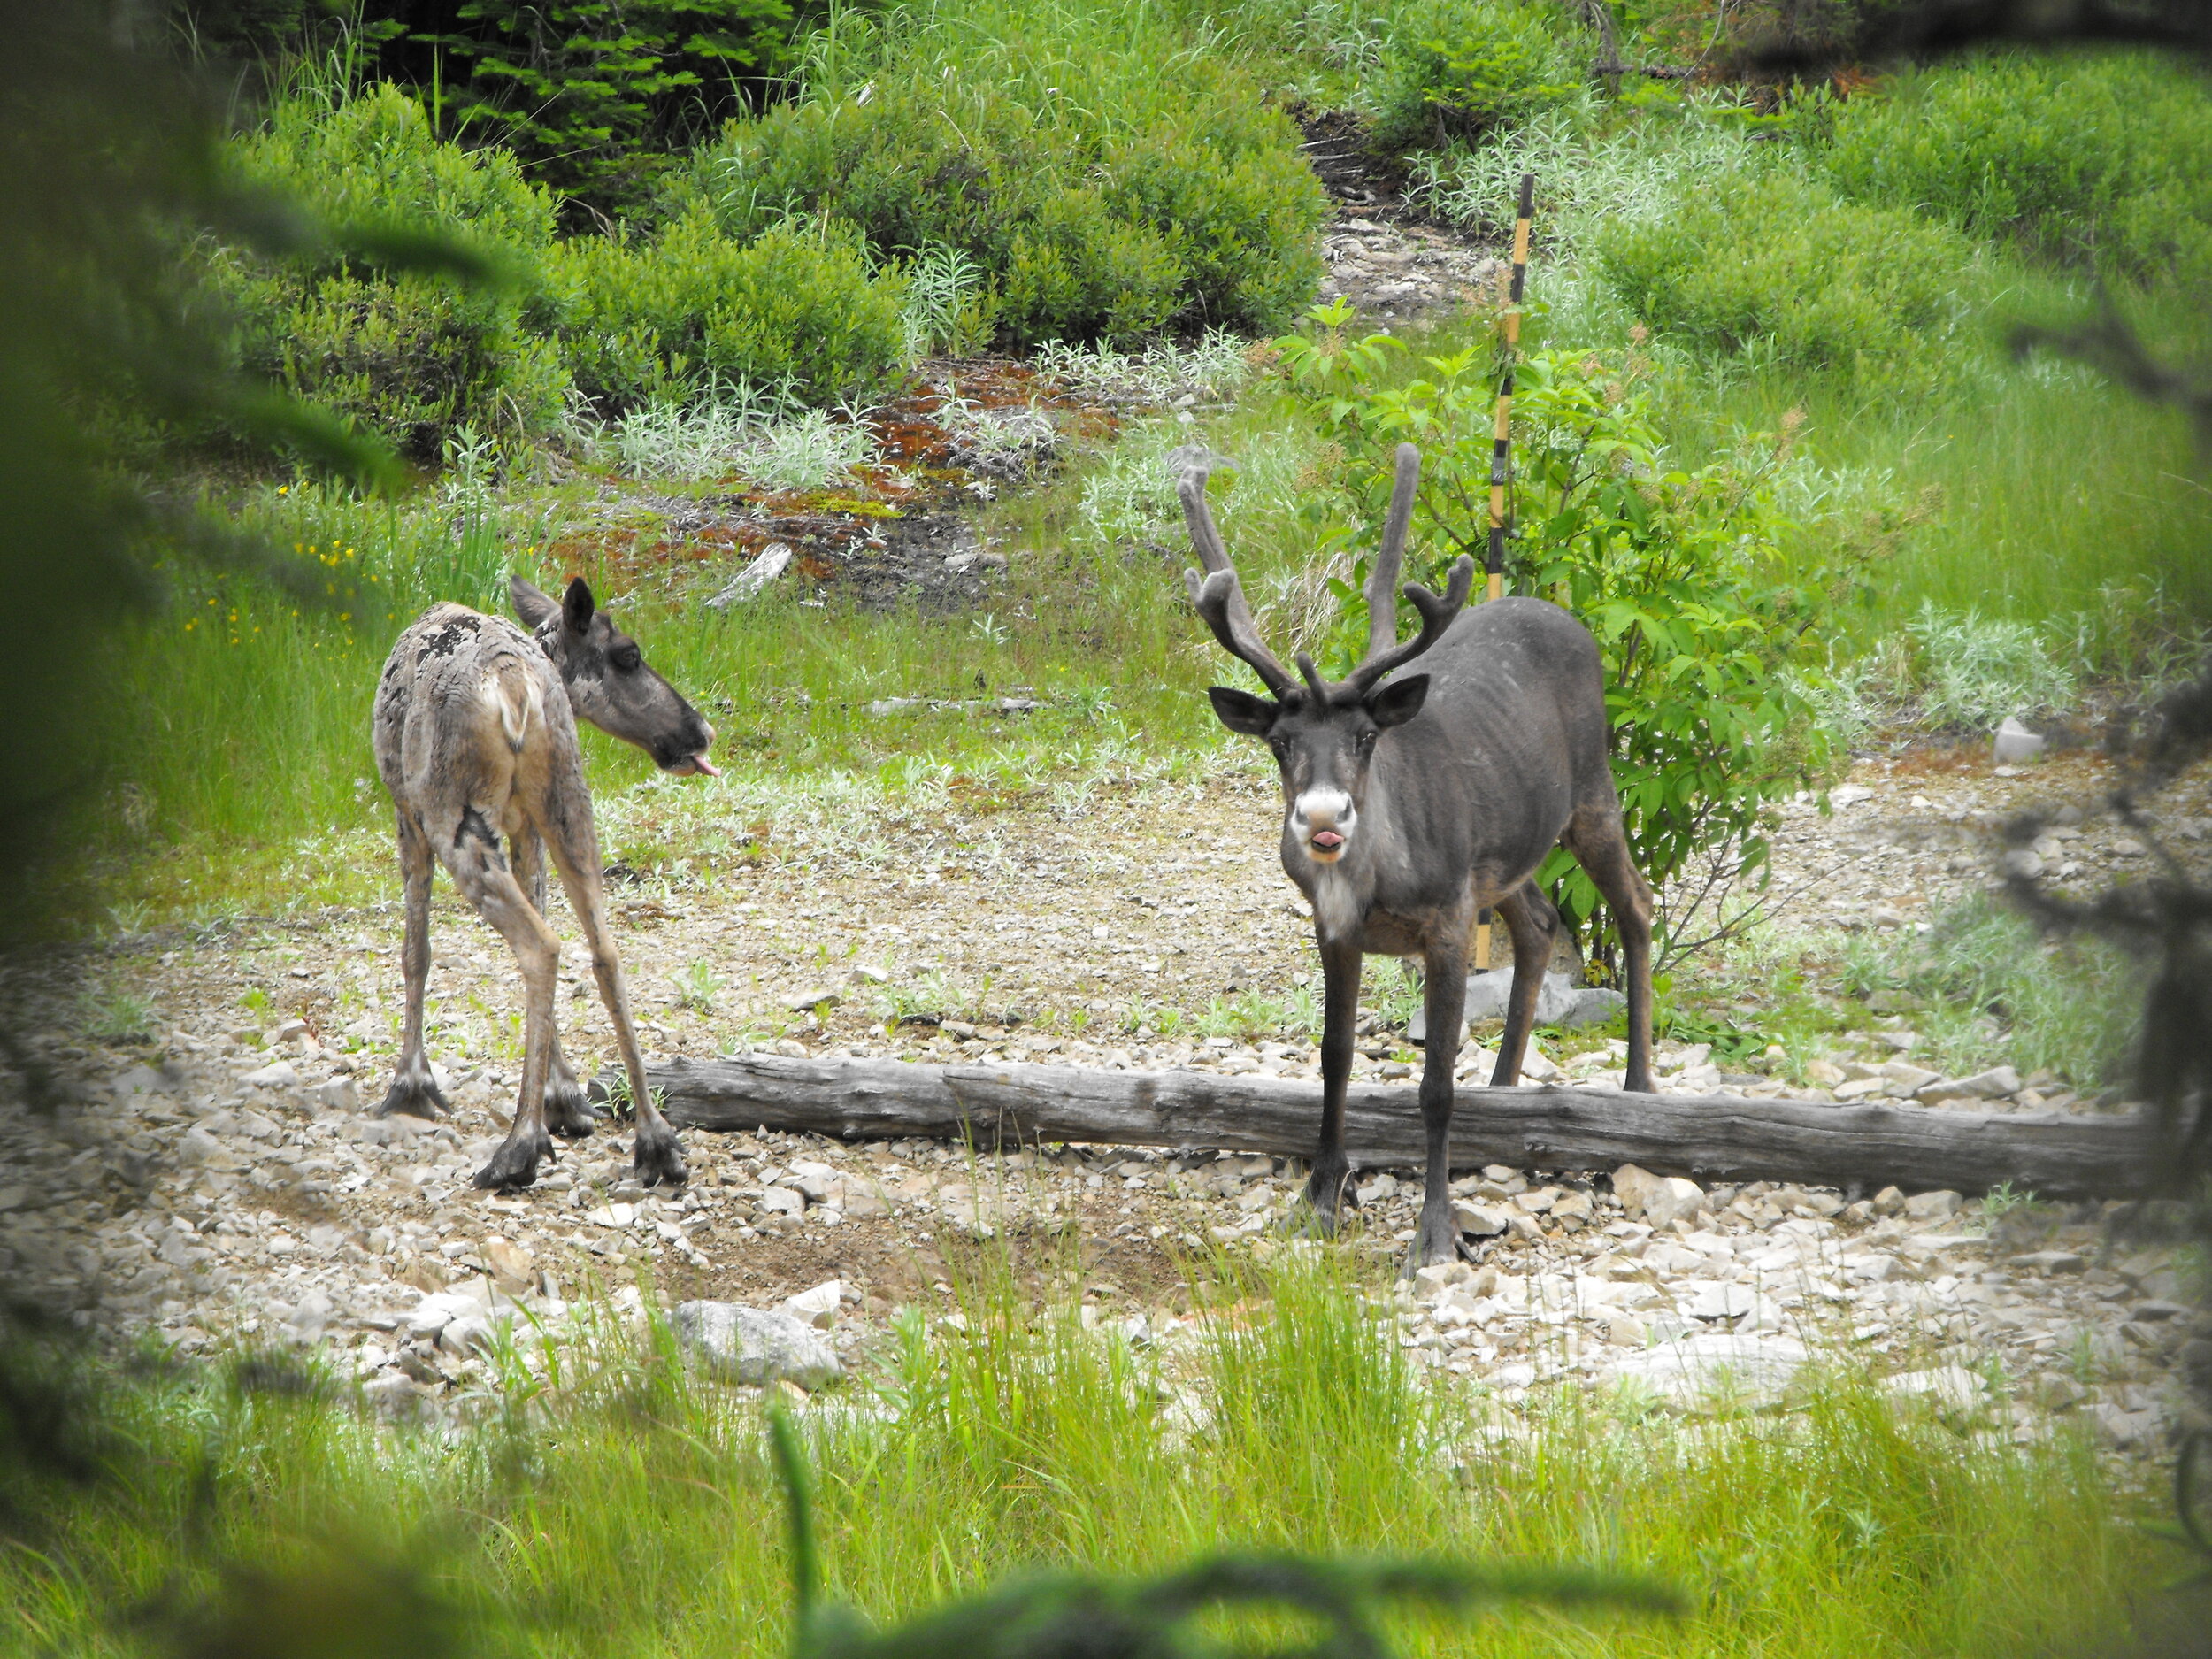 Two caribou, one with antlers and one without, stick out their tongues surrounded by greenery on the Slate Islands of Lake Superior.